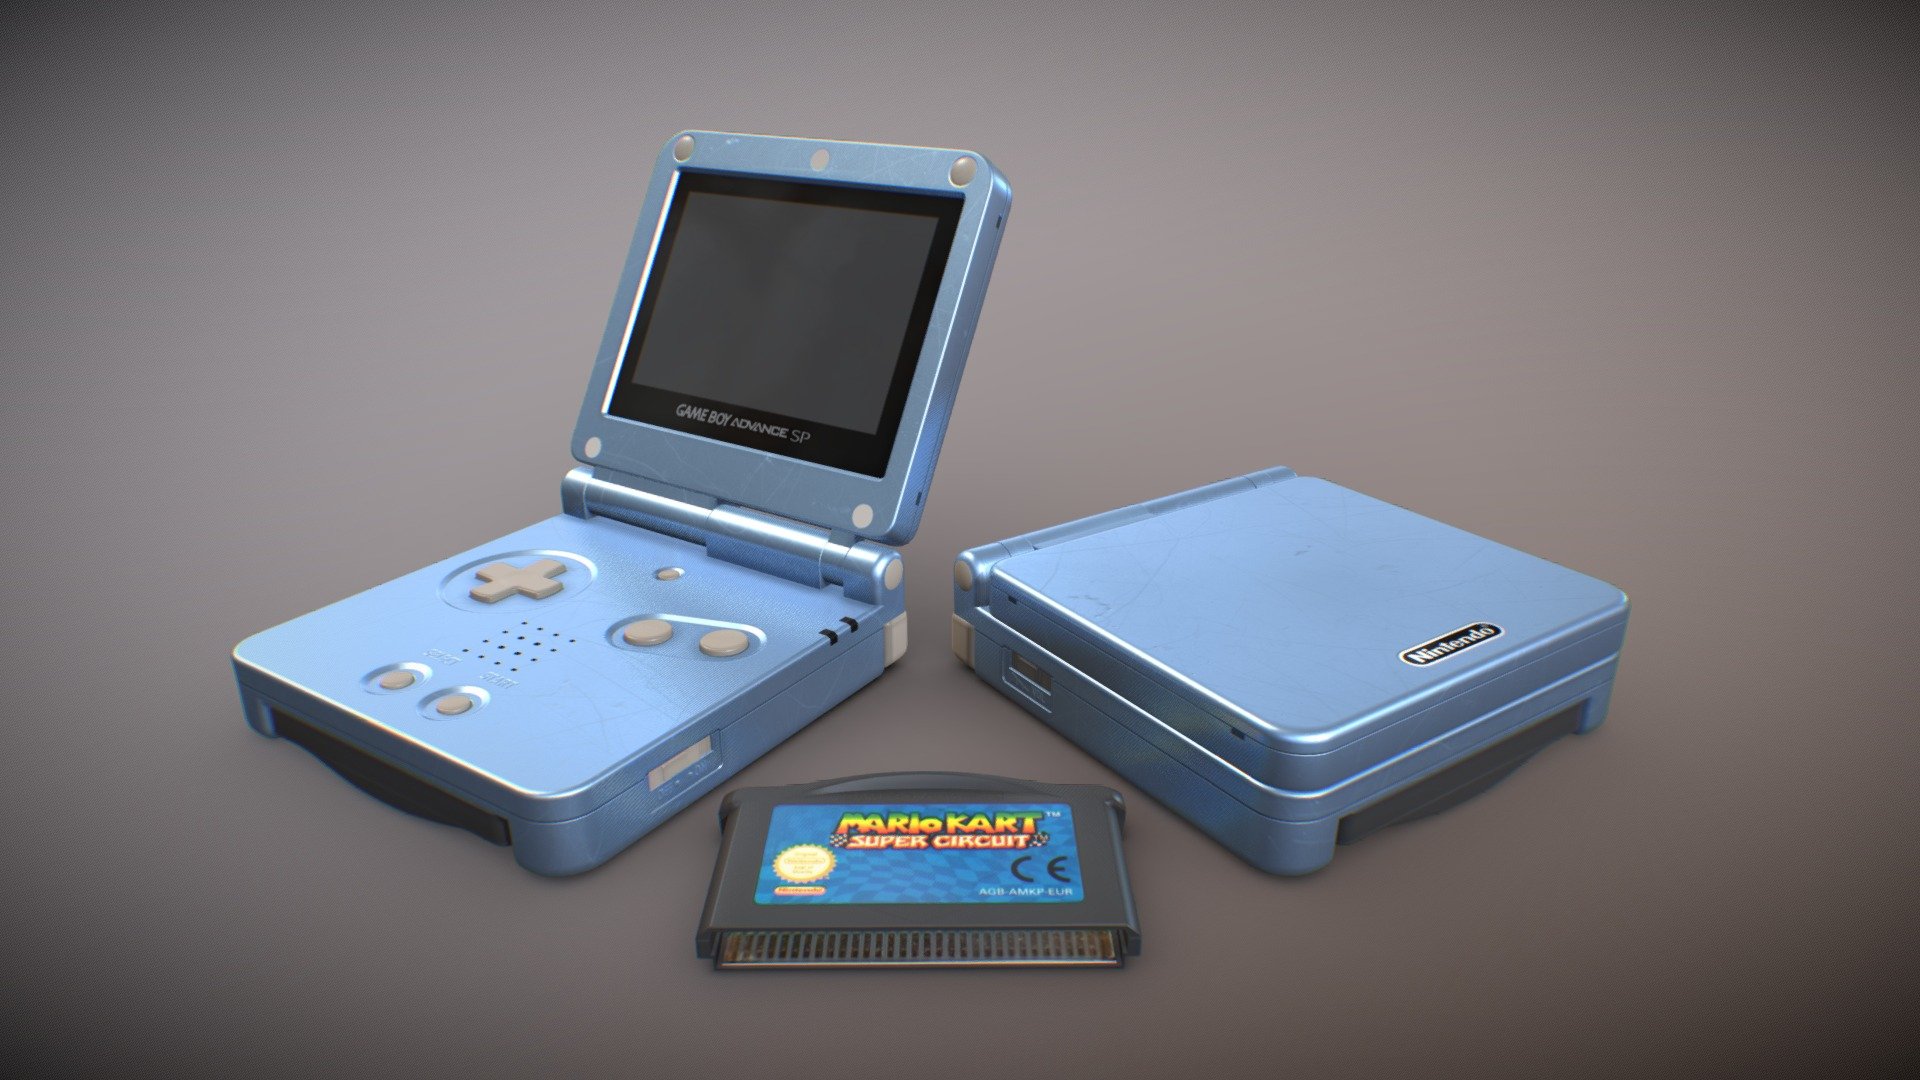 Pearl Blue Nintendo Gameboy Advance SP Console with Mario Kart Super Circuit game cartridge
Modelled and textured in blender - Gameboy Advance SP - Buy Royalty Free 3D model by Geng4d 3d model